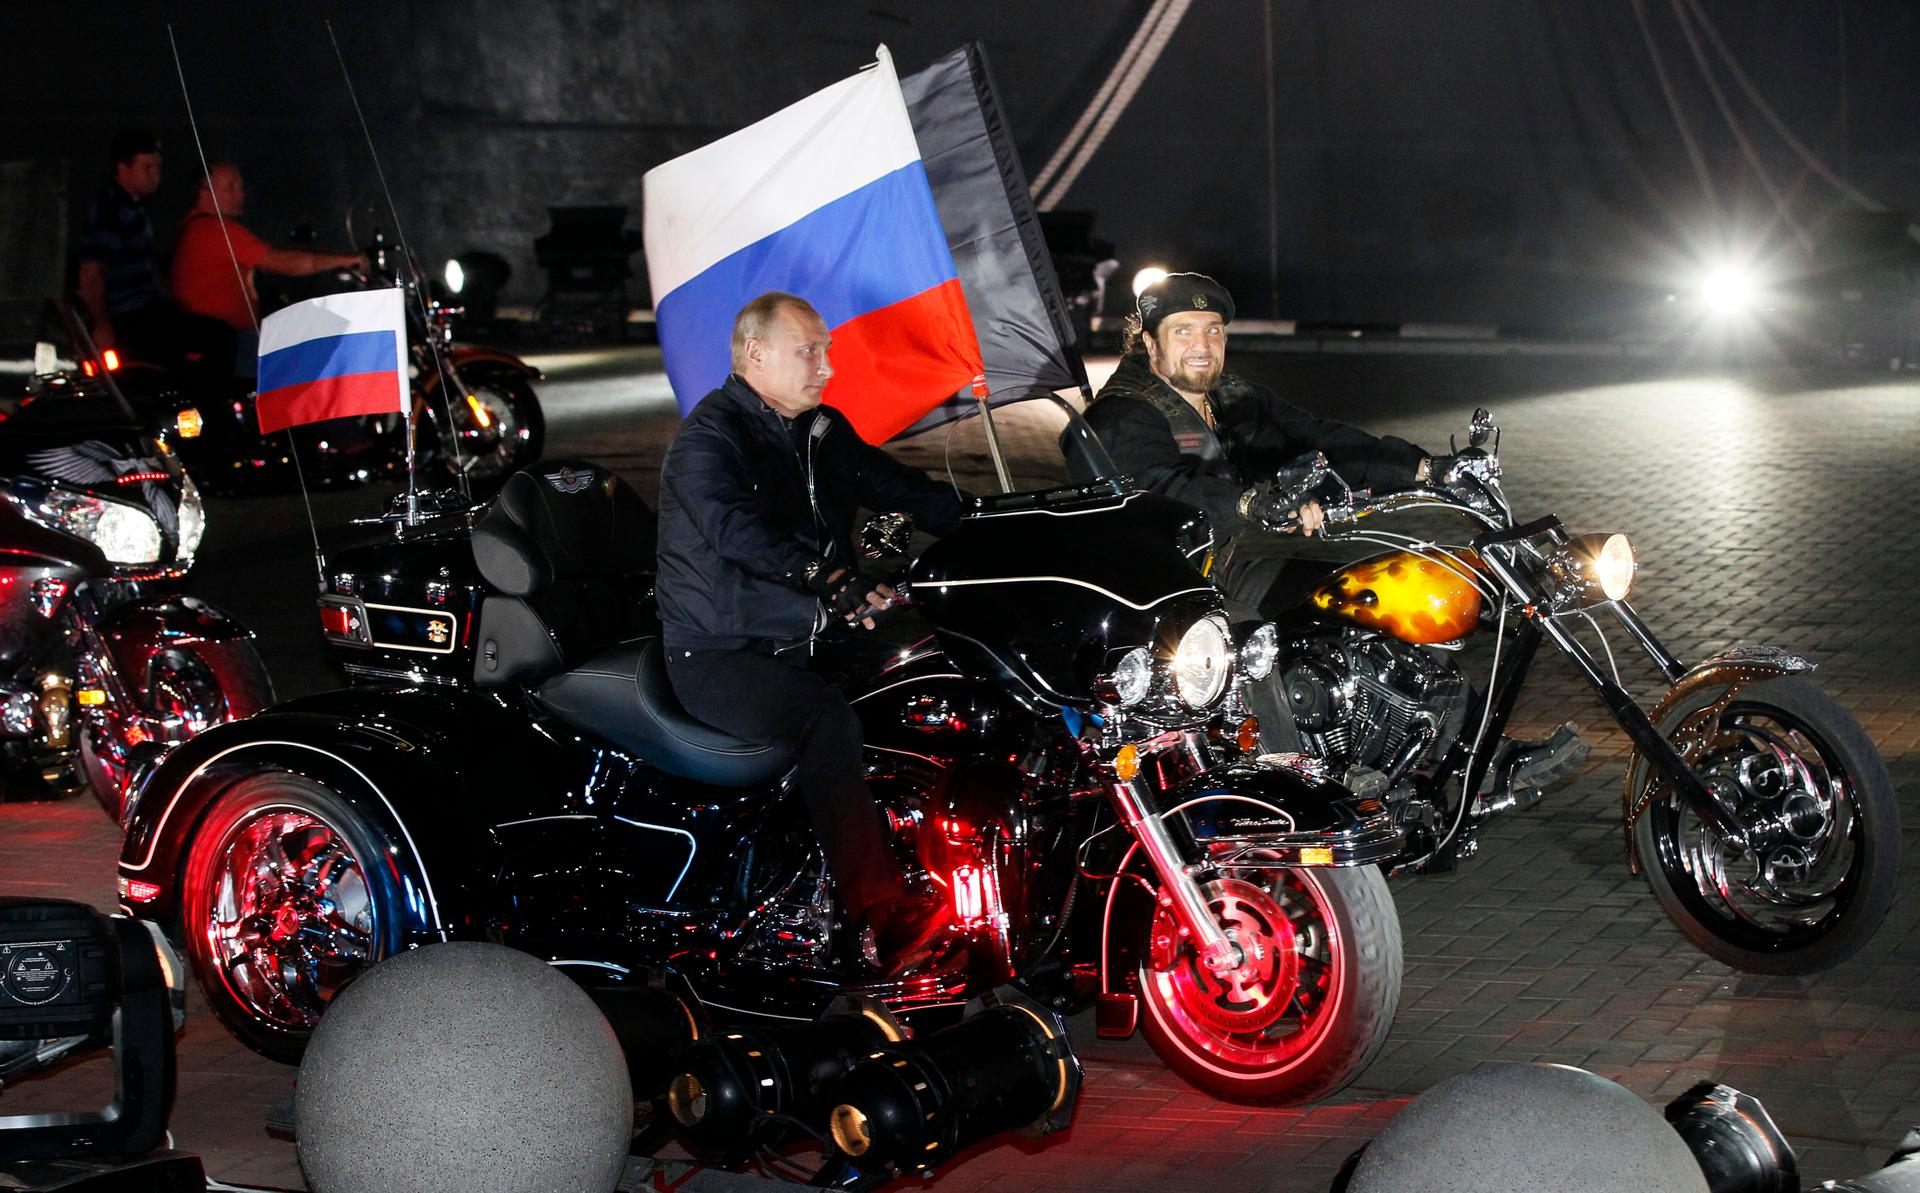 President Putin has used the Night Wolves in public appearances. In 2011 he rode with the group in the Russian city of Novorossiisk. 